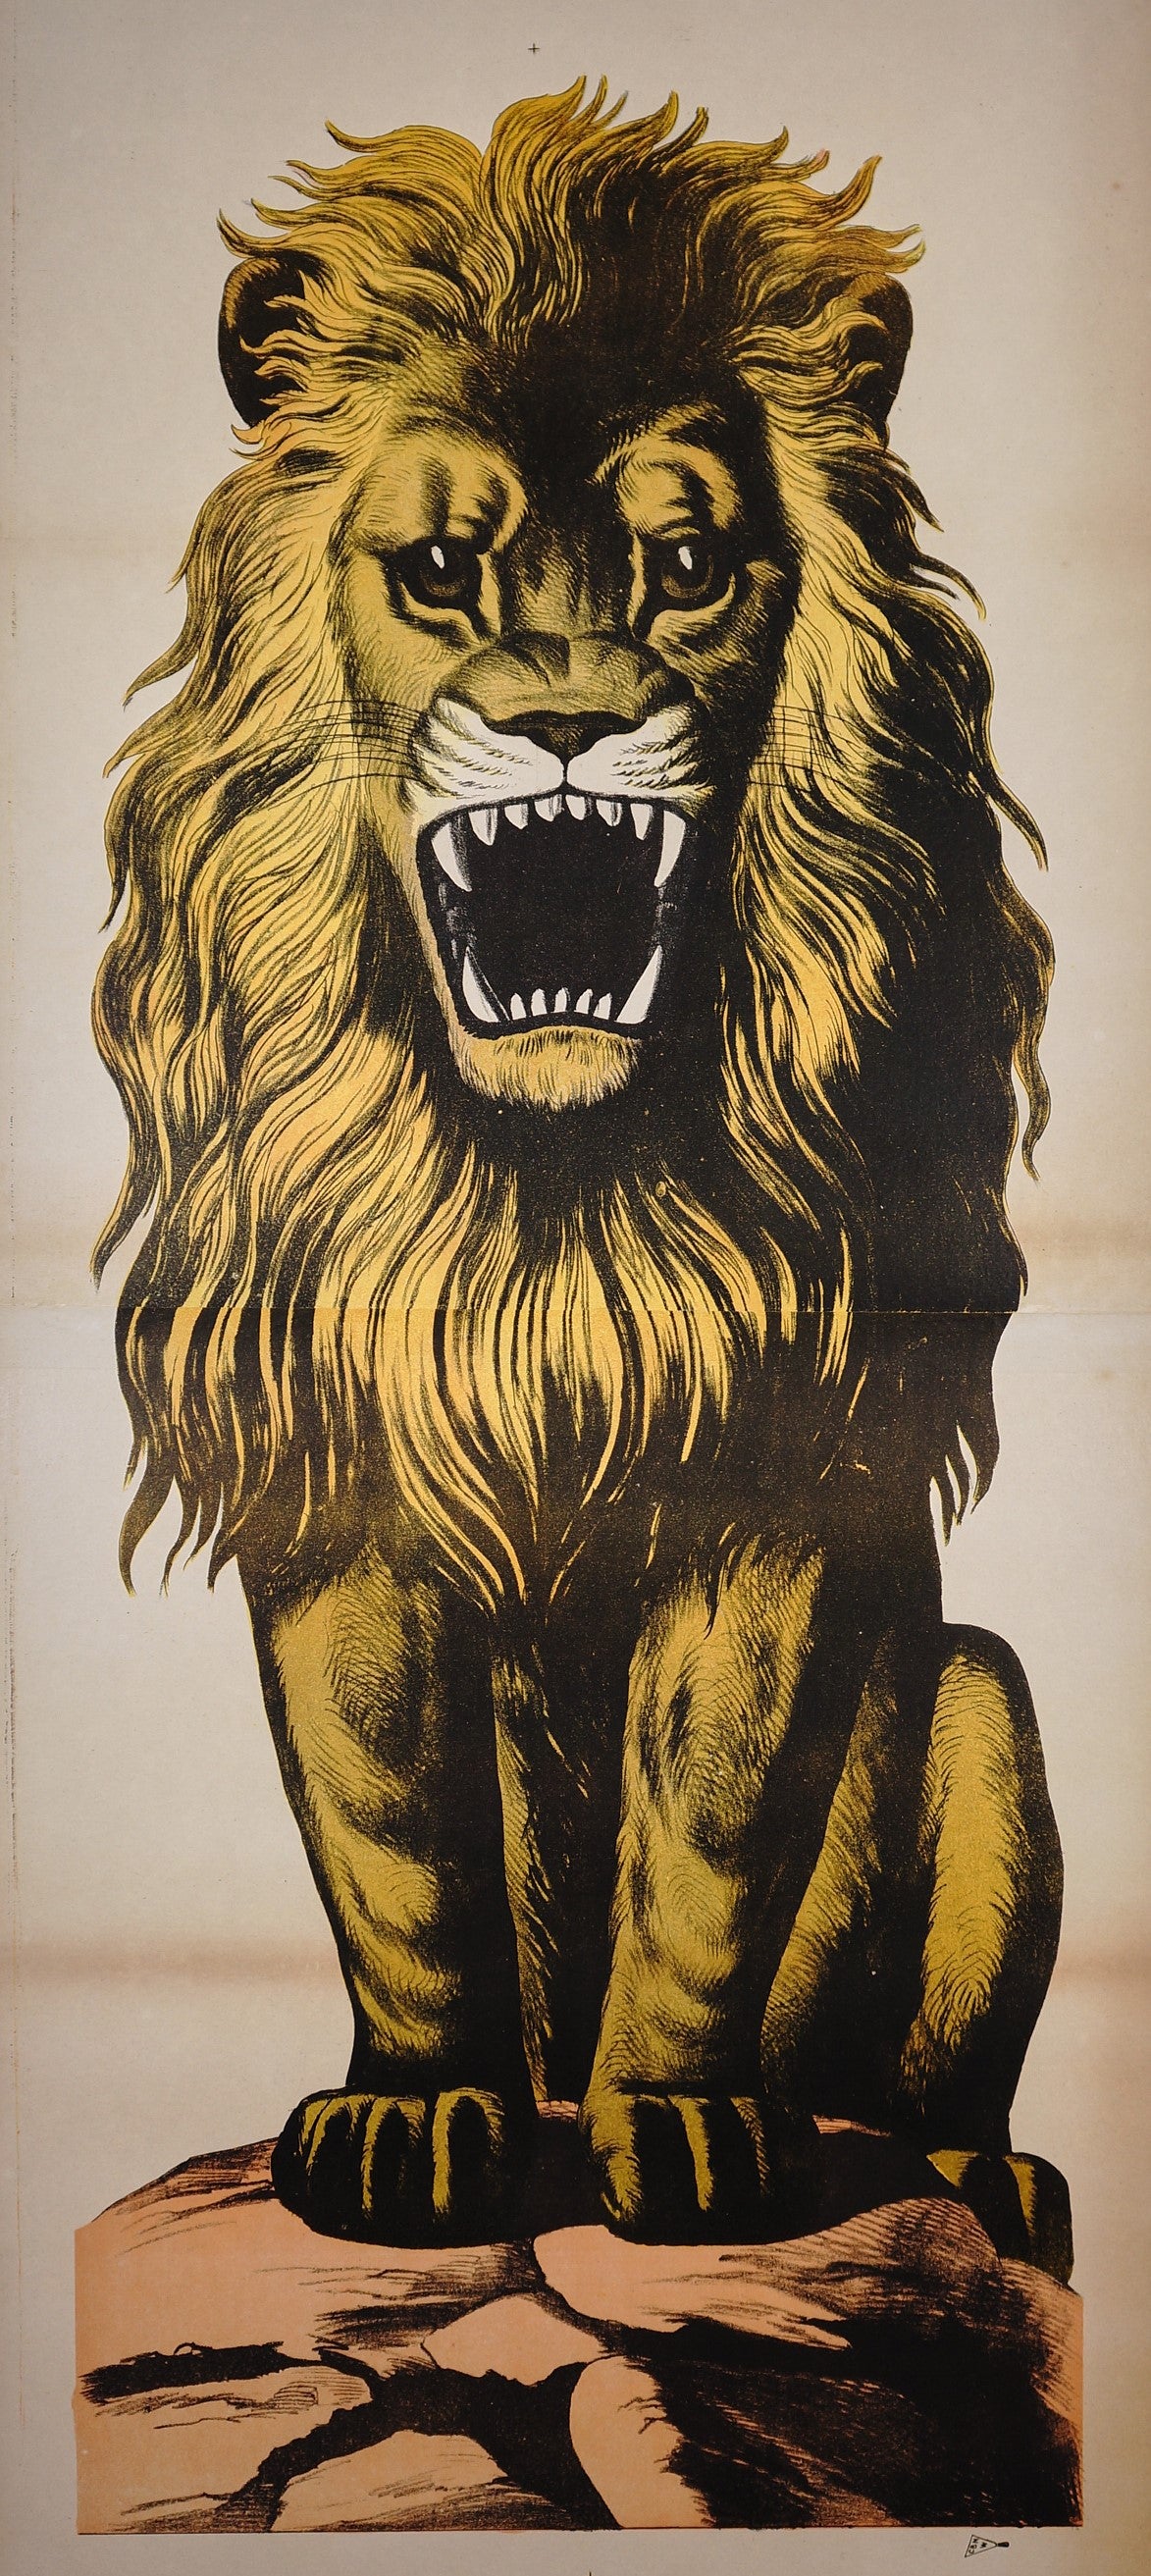 Wissembourg Lion N202 - Authentic Vintage Poster